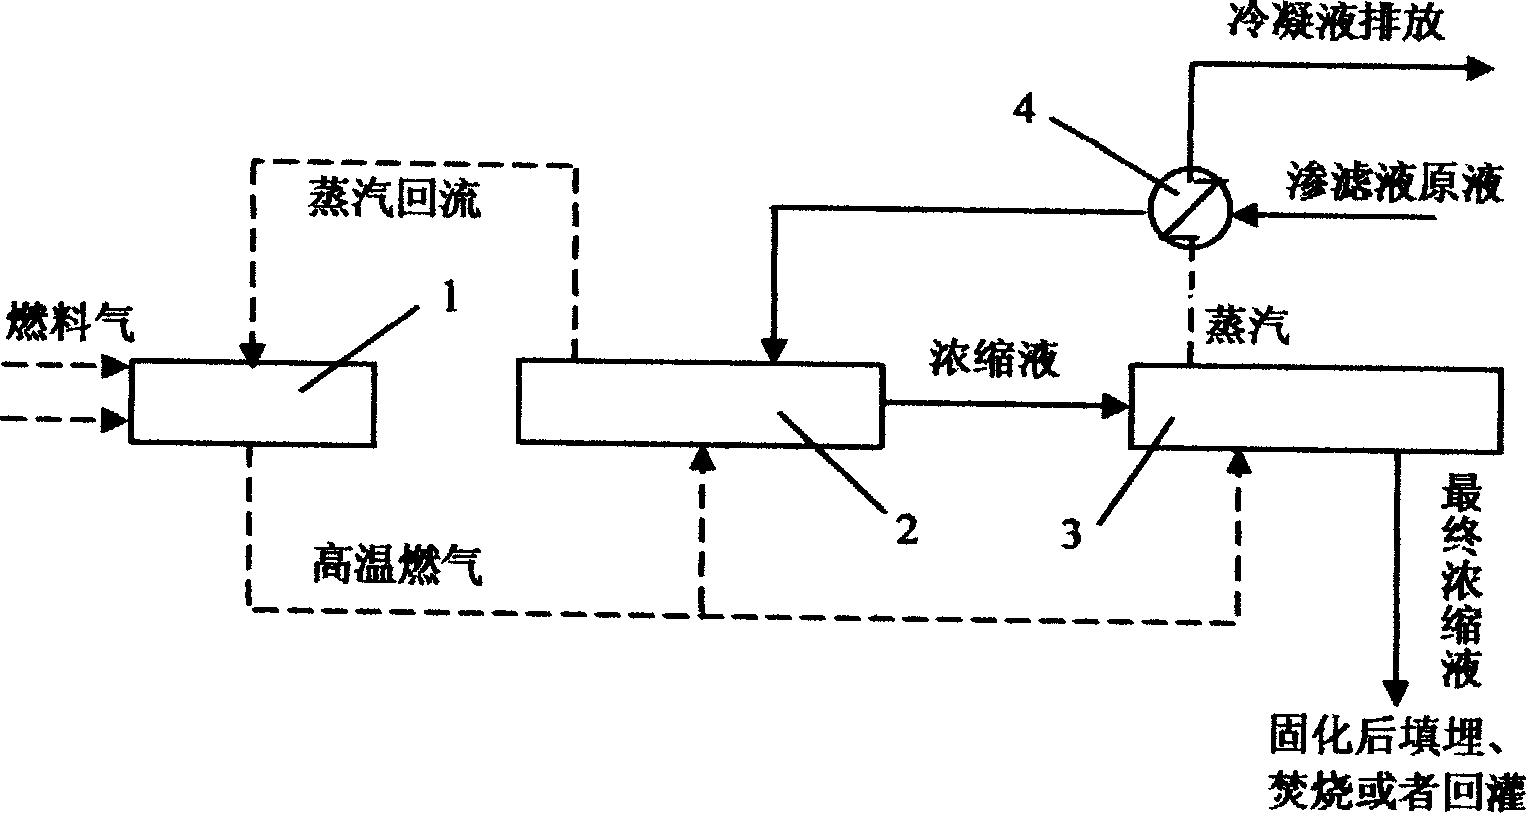 Two-stage immersion combustion evaporation process for treating percolate from filling field